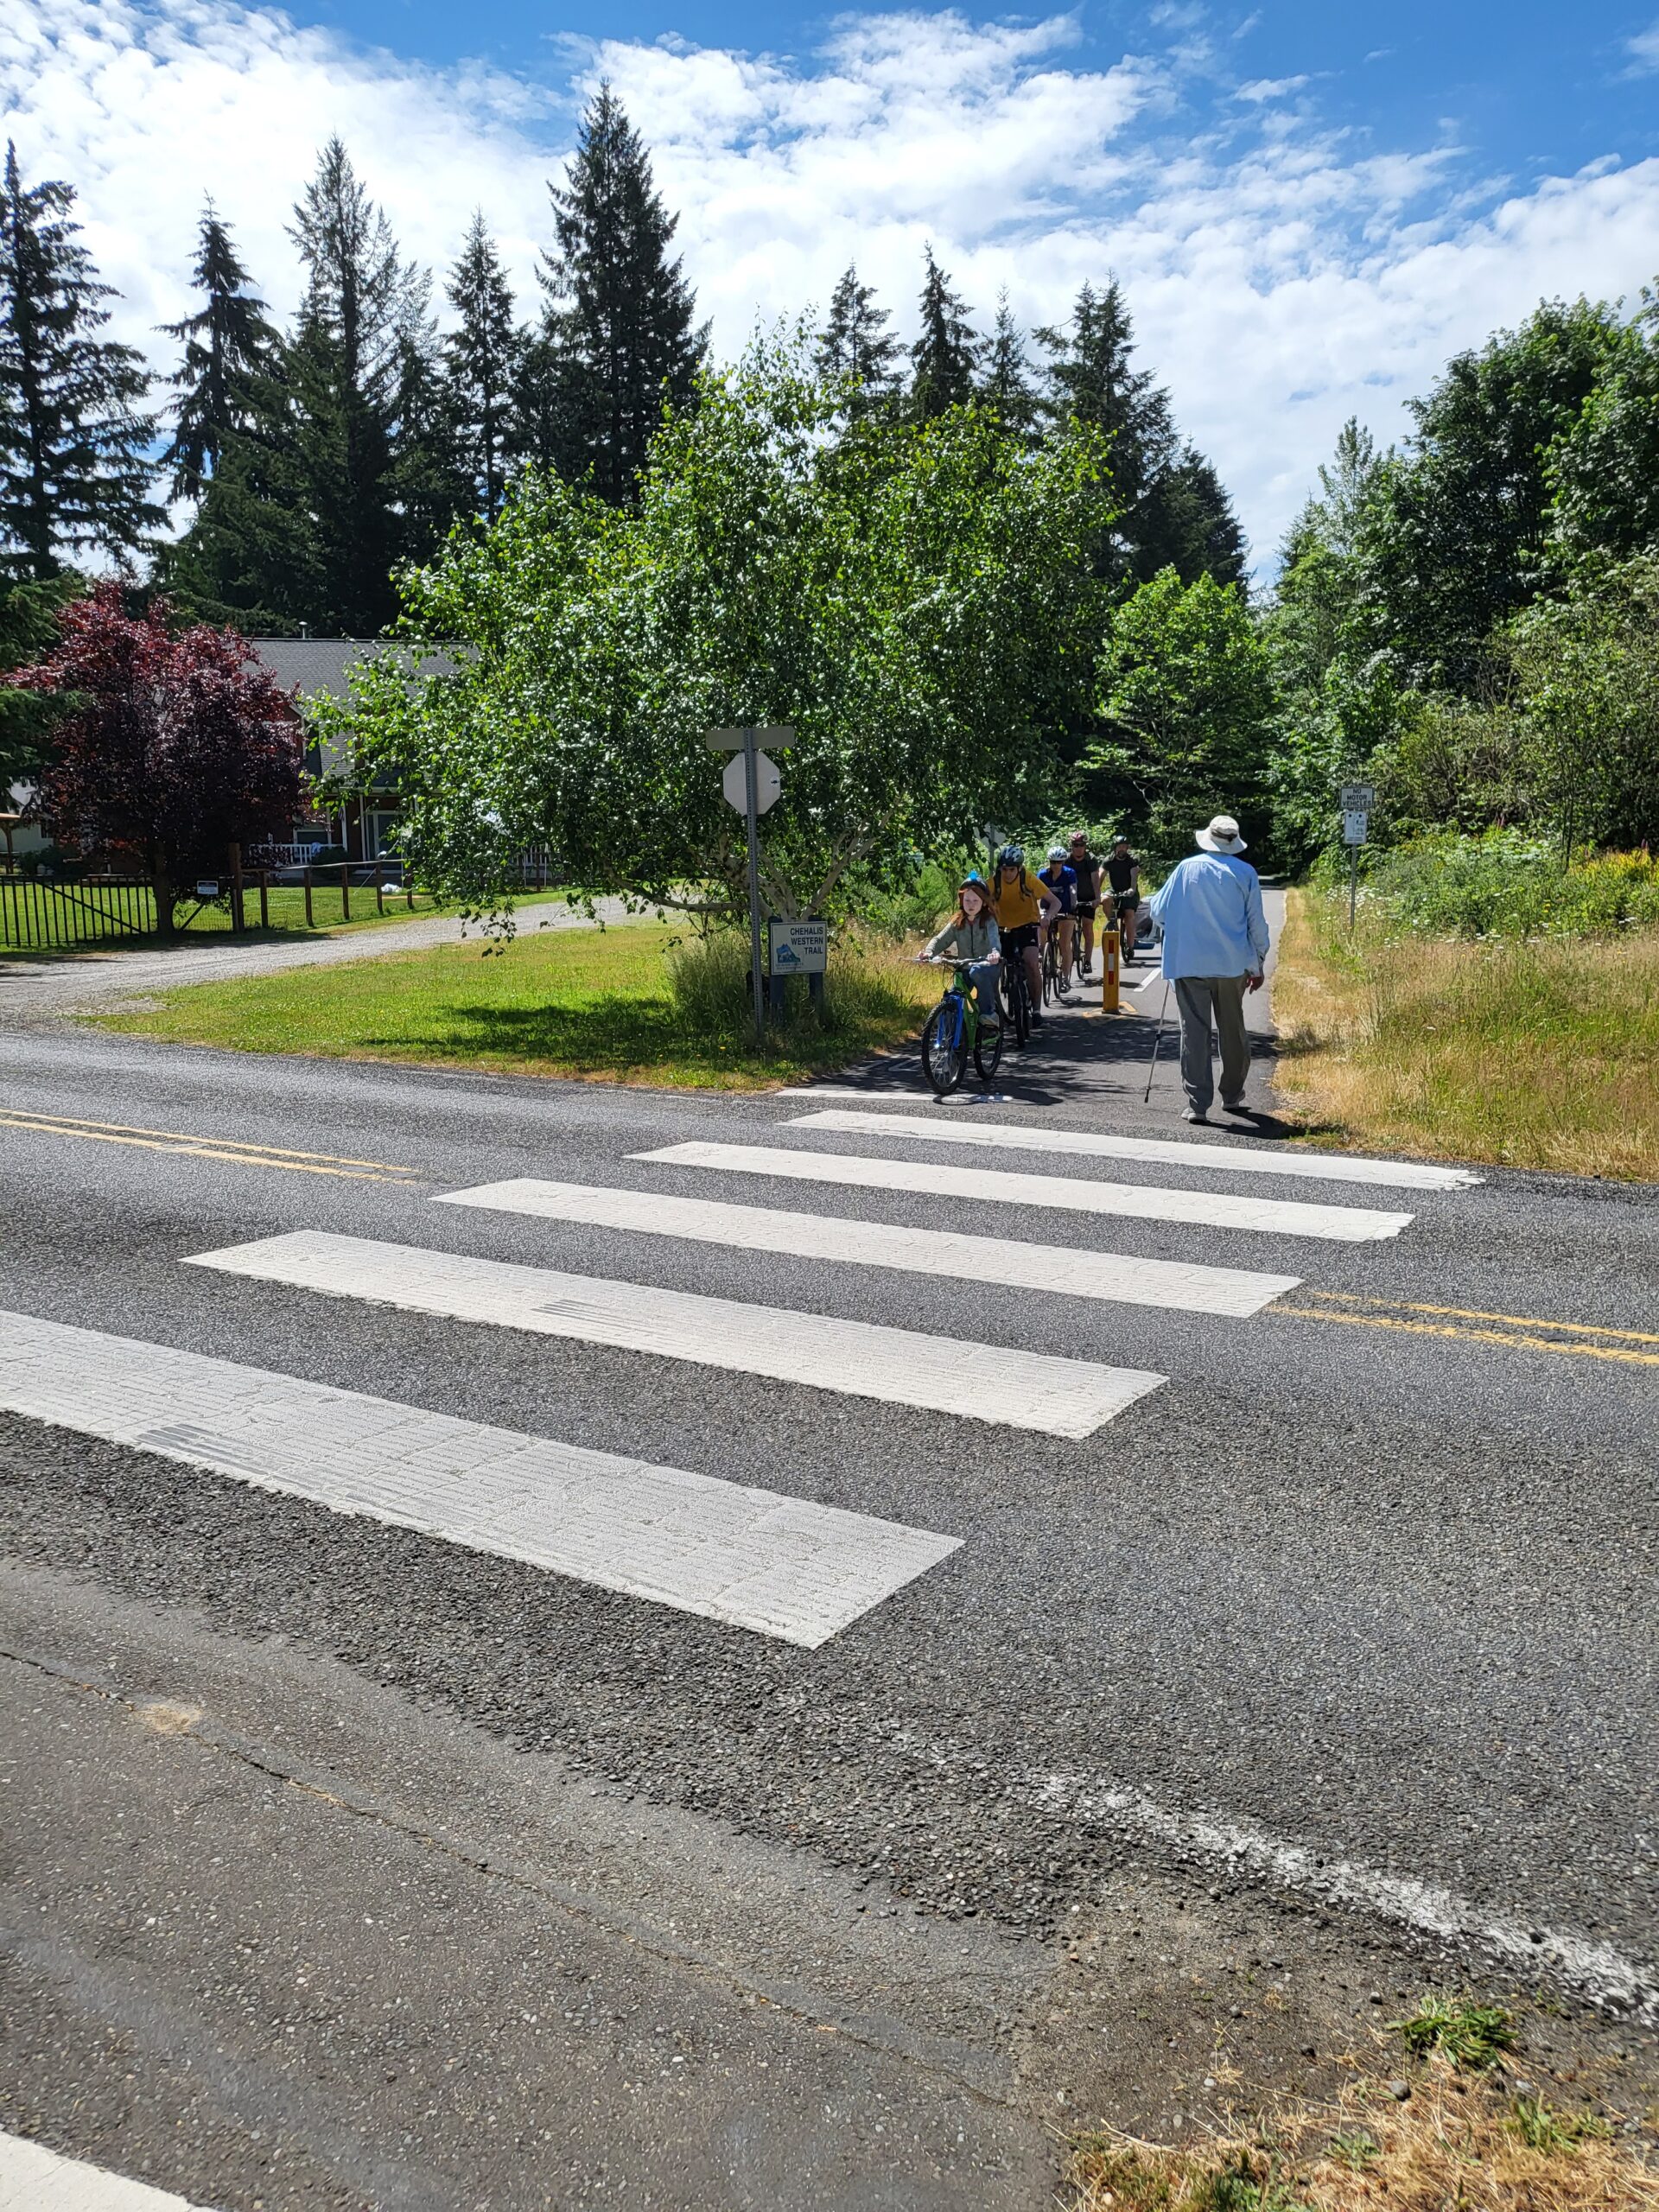 Scouts riding bikes waiting at the crosswalk.